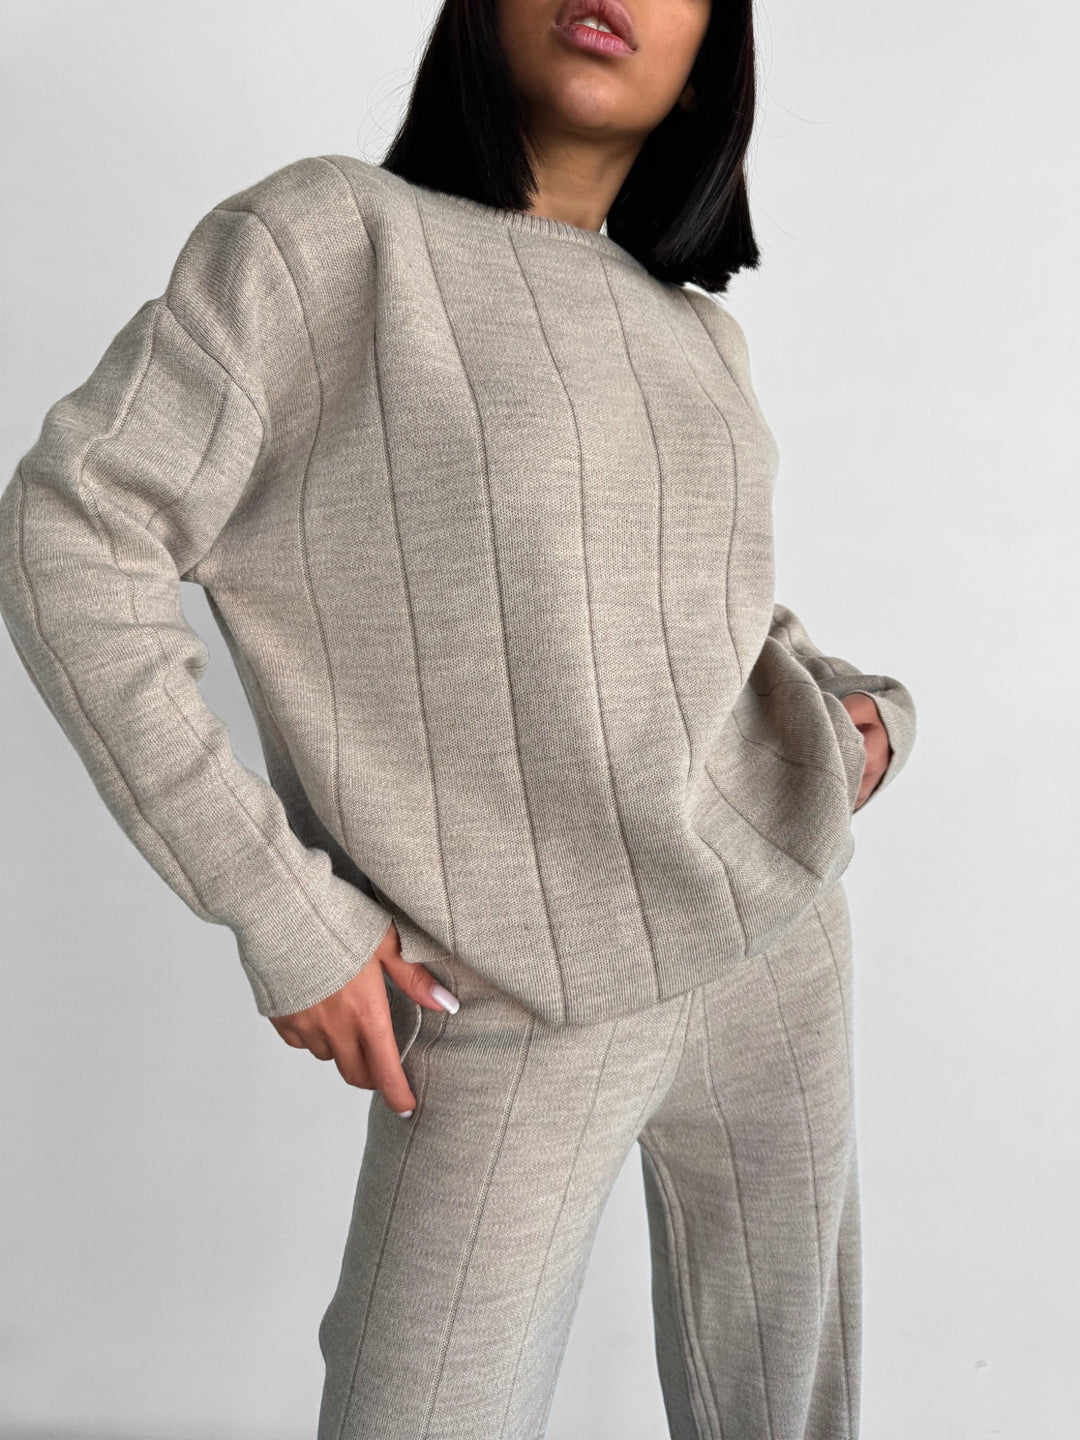 Knit Textured Sweater - Stone